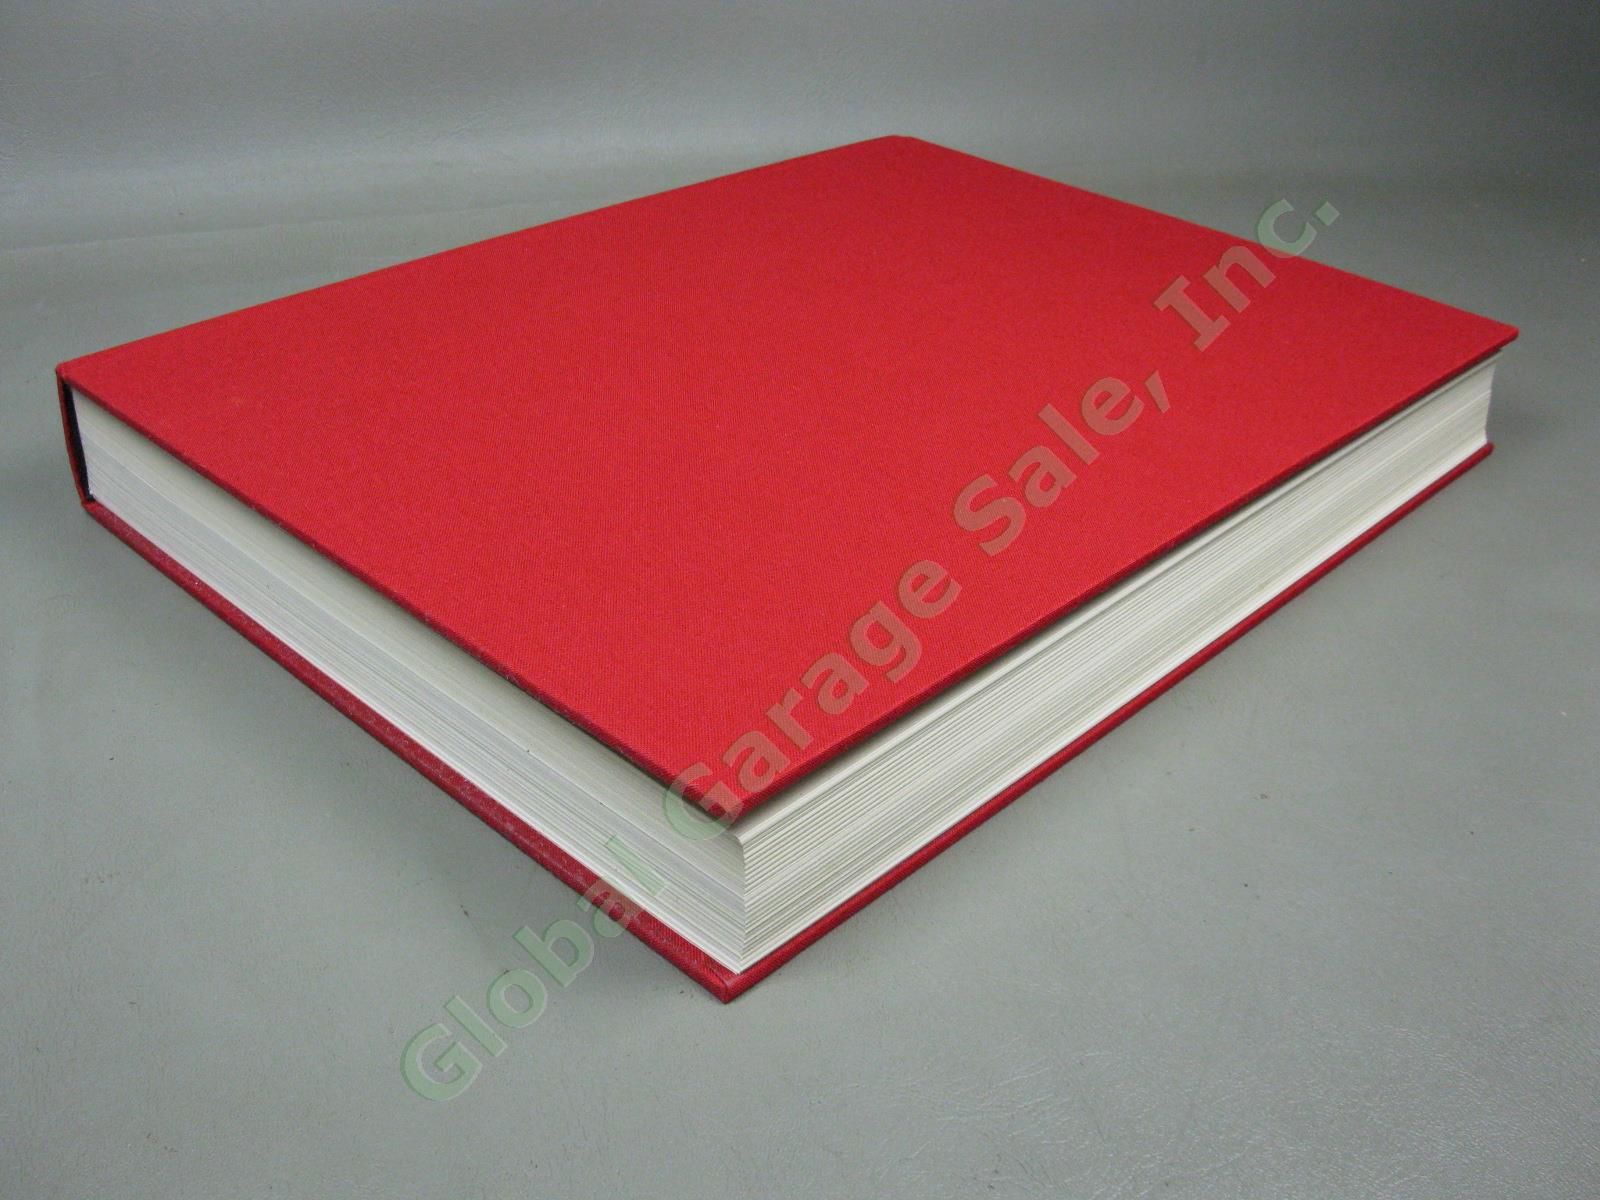 C.G Carl Jung The Red Book Liber Novus 2009 First Edition Hardcover +Dust Jacket 14